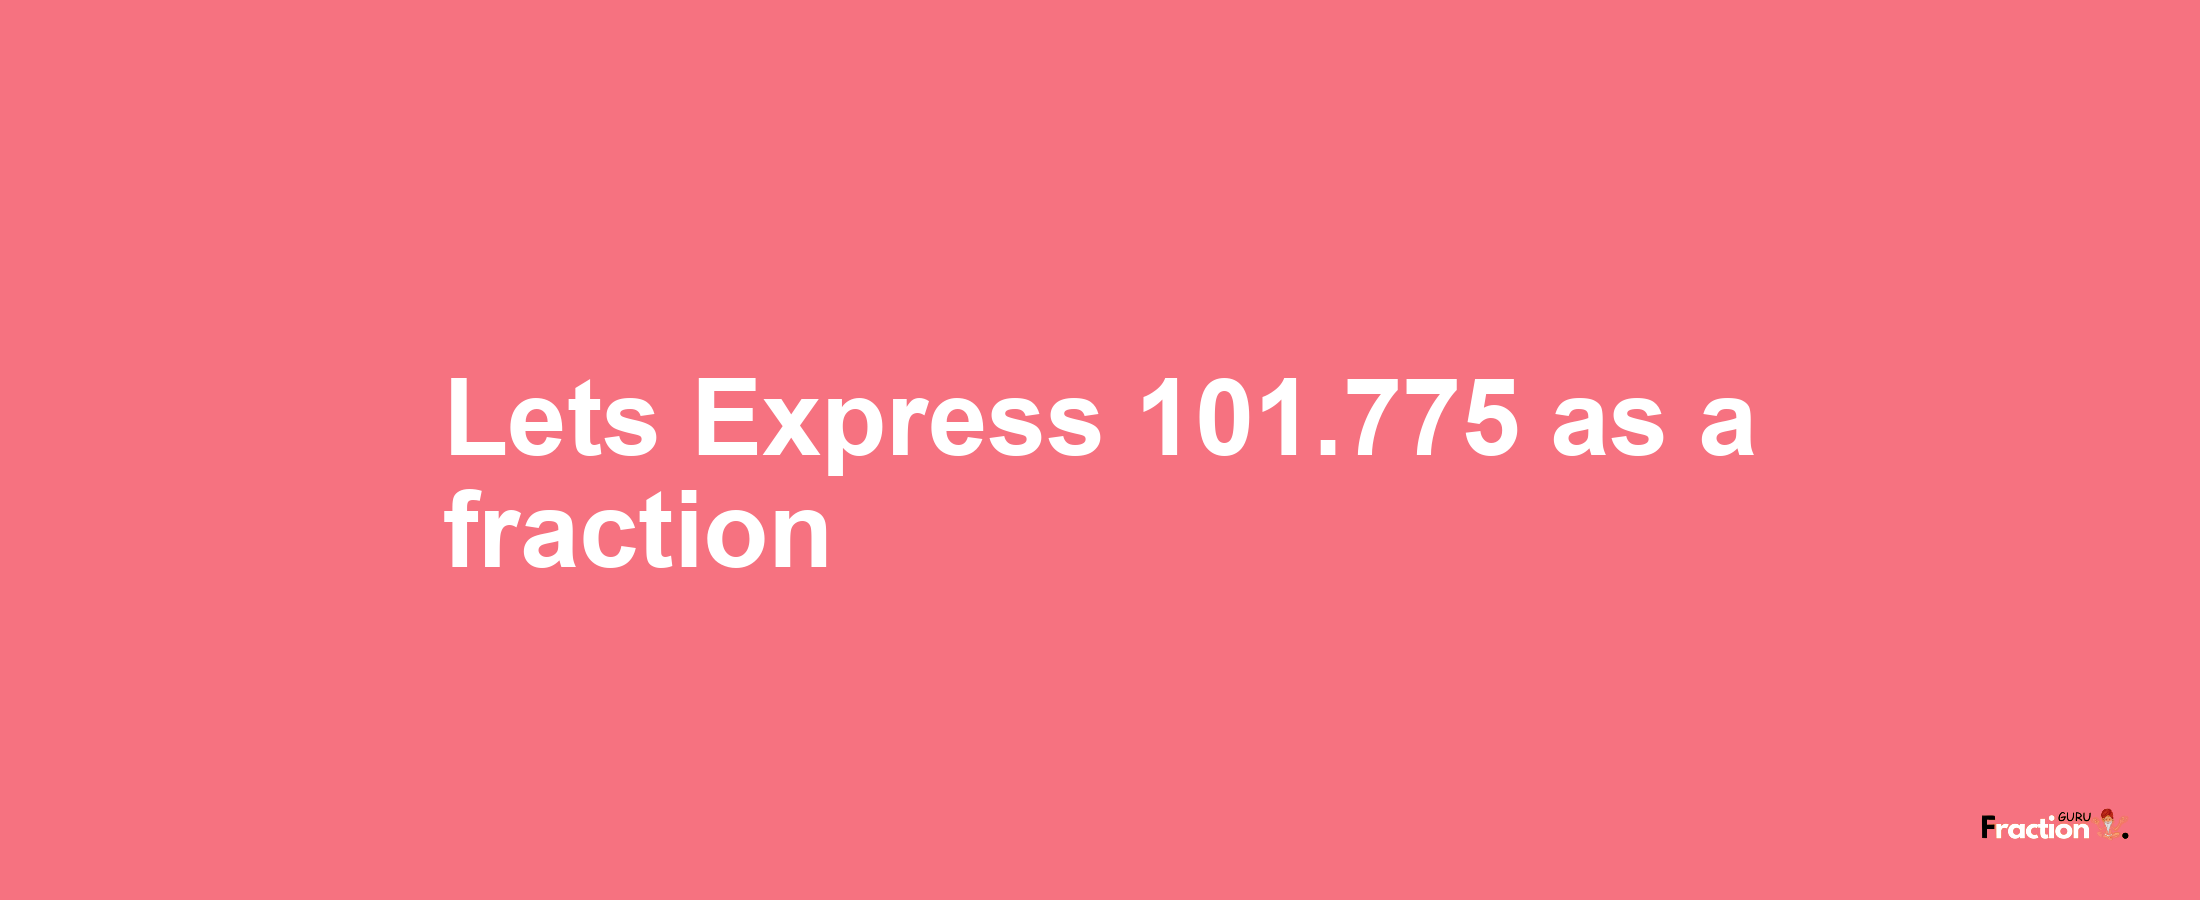 Lets Express 101.775 as afraction